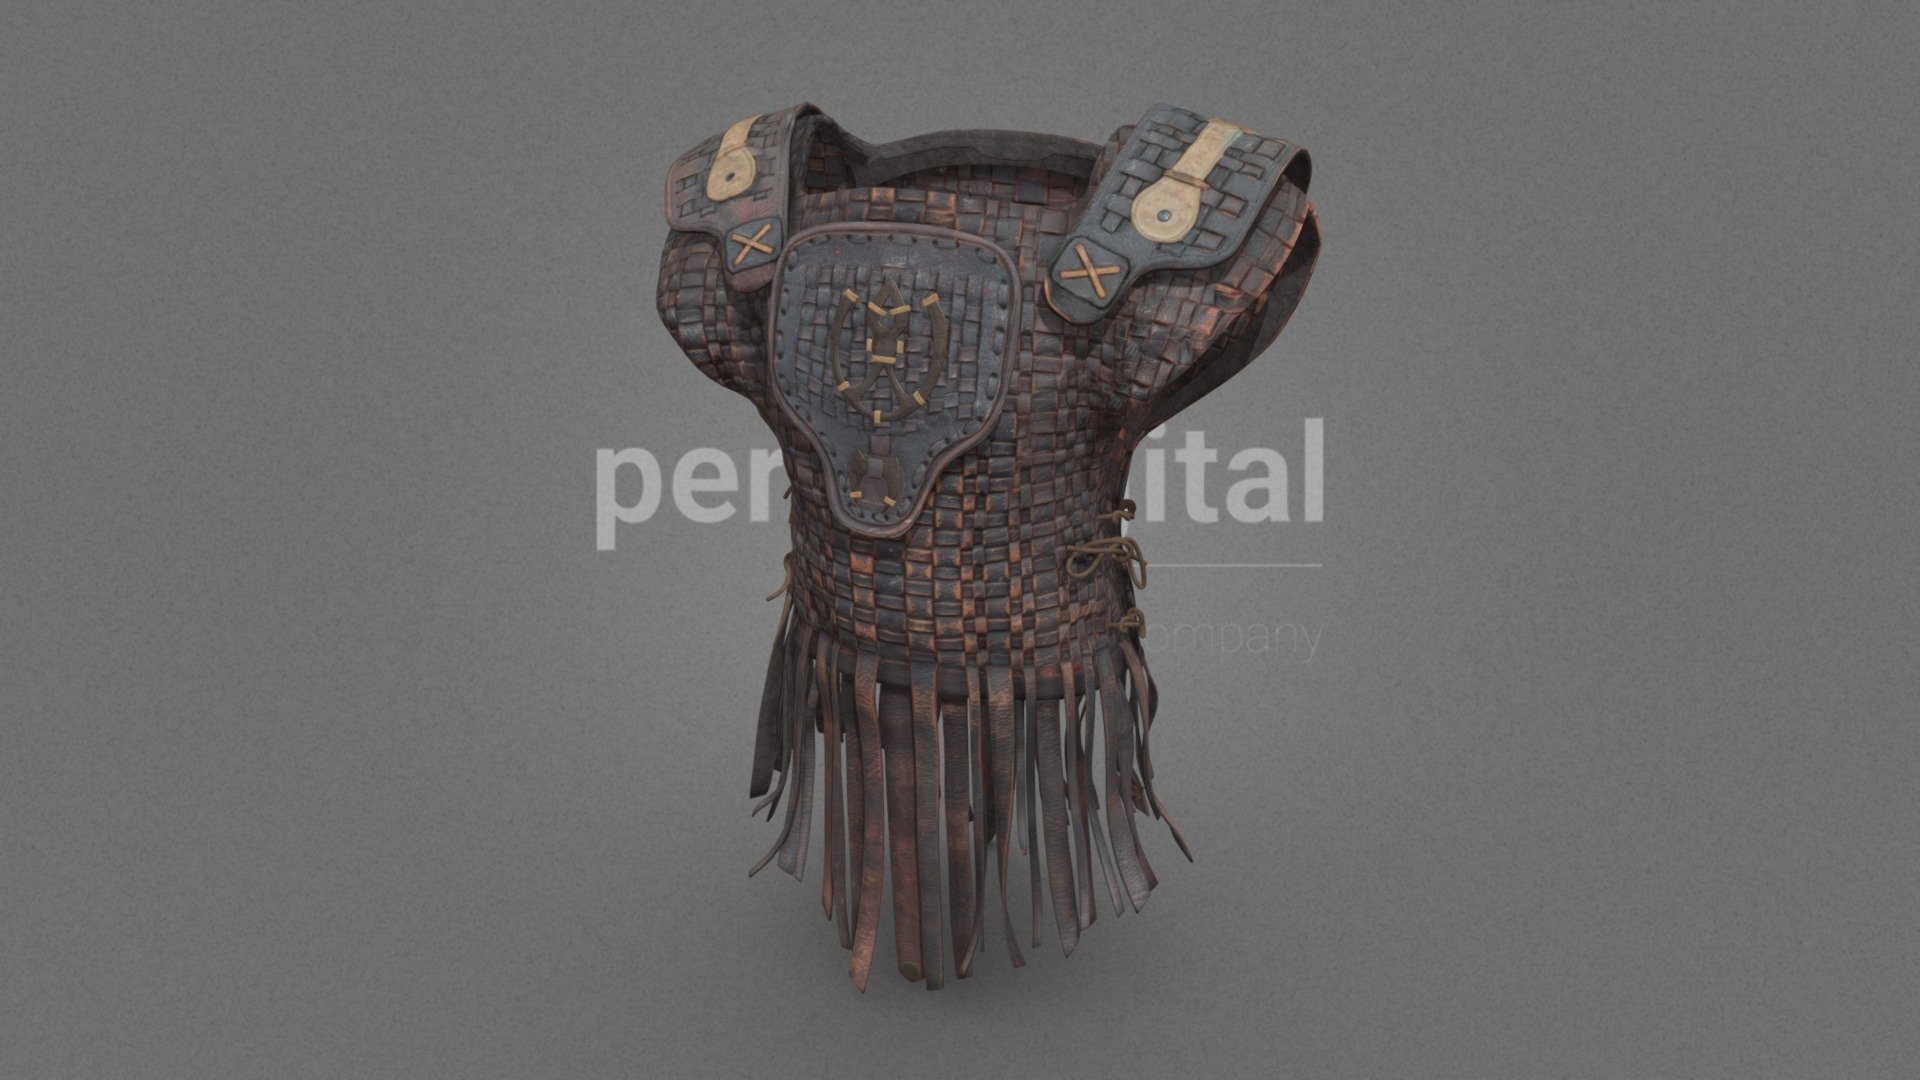 Leather cuirass armor

We are Peris Digital, and we make RAW meshes (Photogrammetry) and Digital Doubles.

This is a RAW mesh, taken by our photogrammetry team in our RIG with 144 Sony Alpha cameras.
Check our web, make your selection and contact us to get your costume scanned or talk with us to take a Demo RAW mesh to download it.

Contact: info@peris.costumes - Leather Cuirass 12 - Buy Royalty Free 3D model by Peris Digital (@perisdigital) 3d model